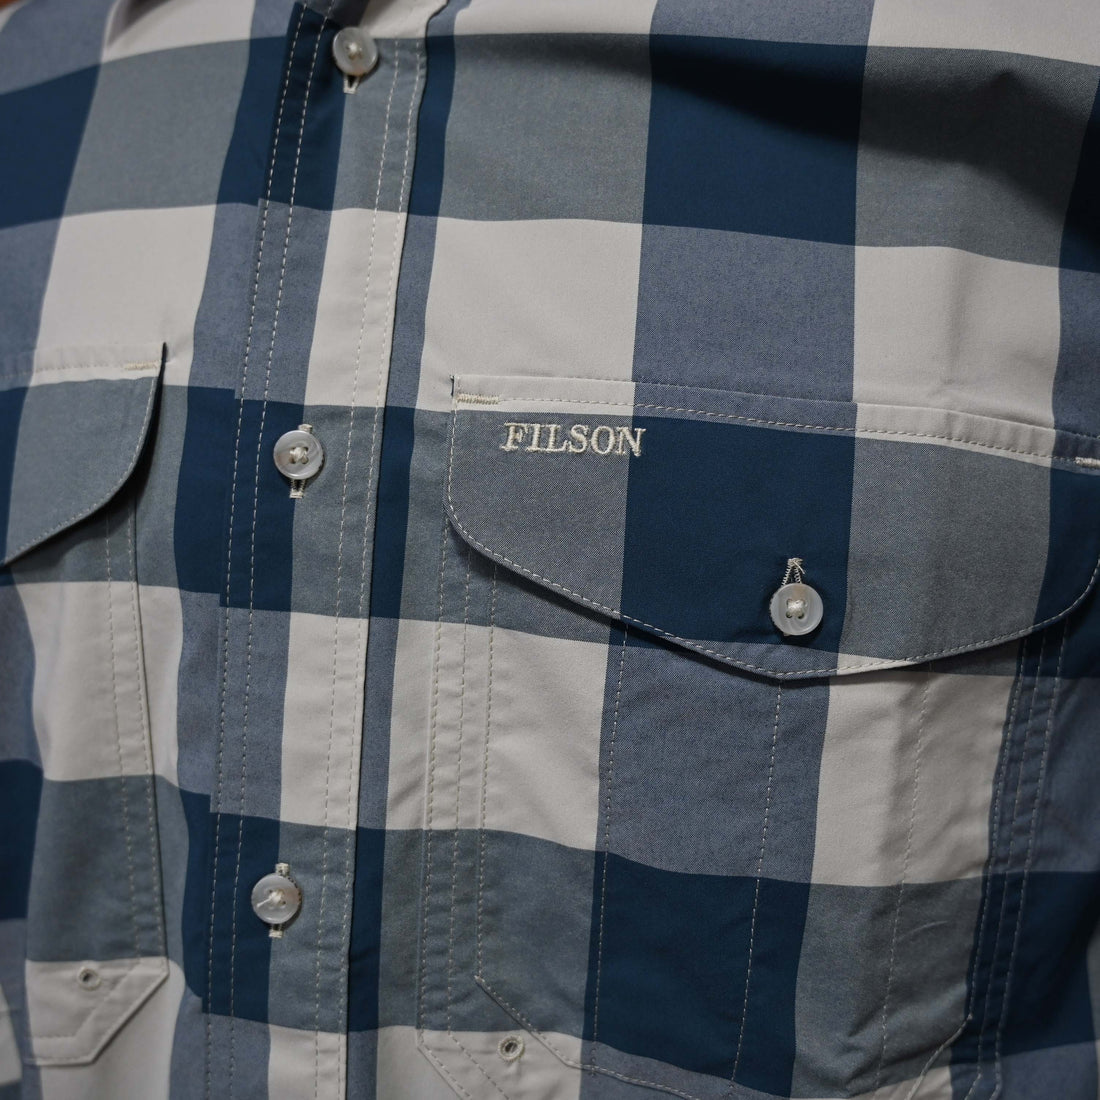 Filson Twin Lakes Sports Shirt in Cream and Teel by Filson view of detail